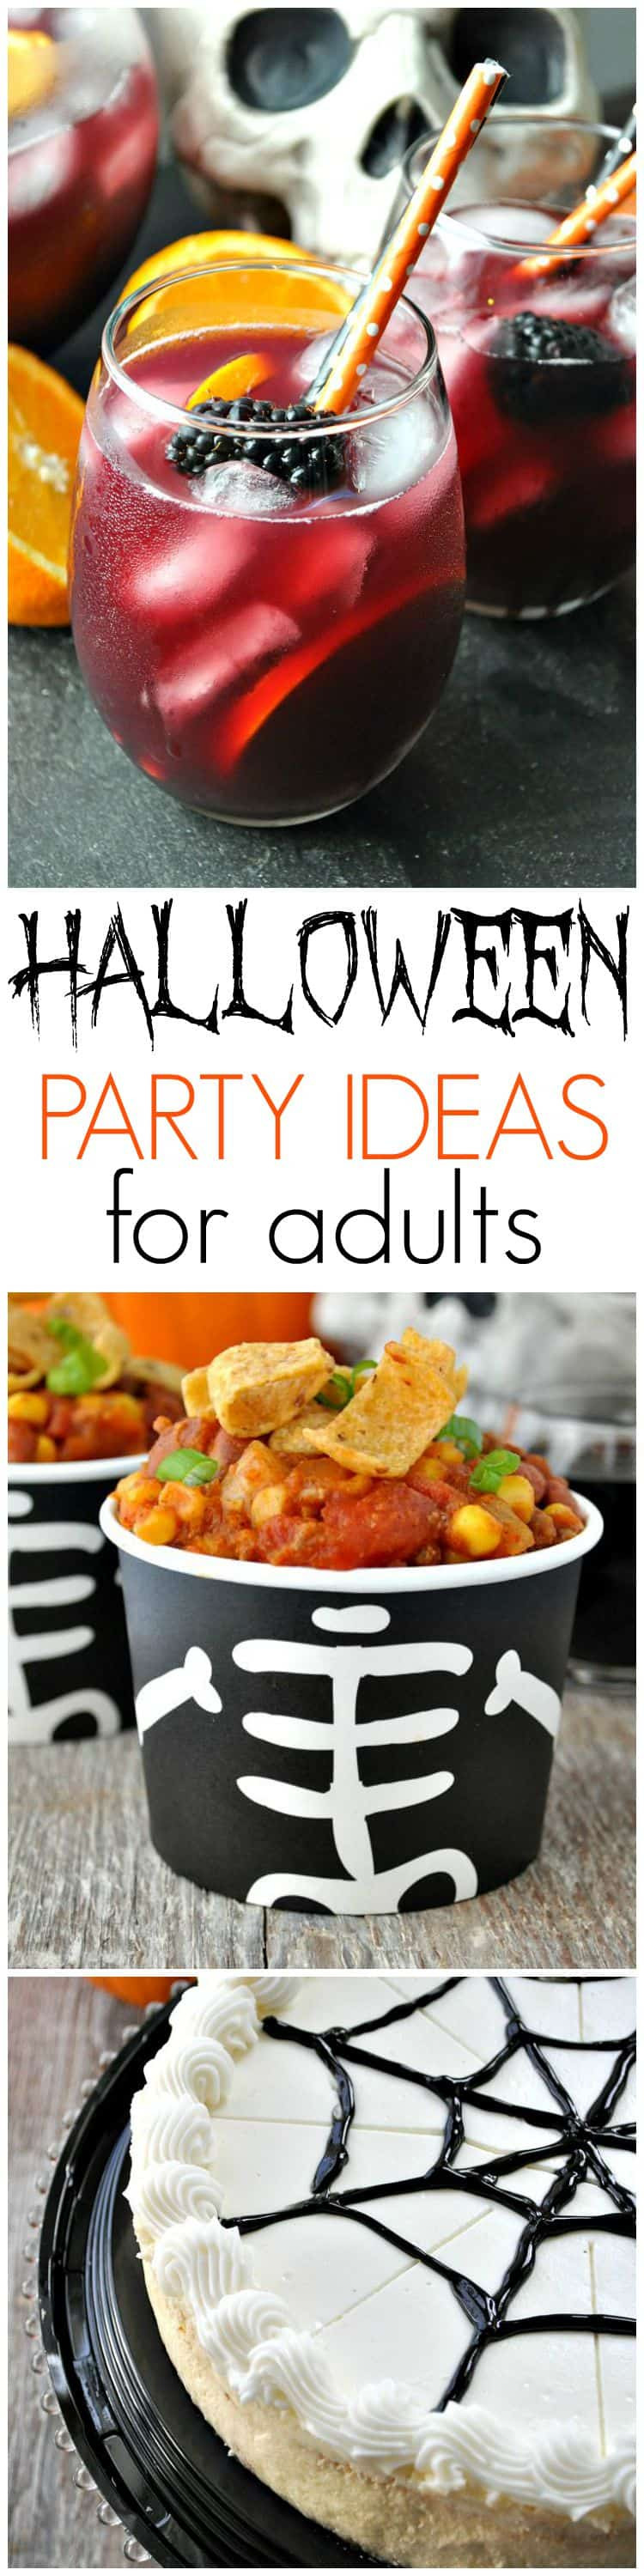 Halloween Party Theme Ideas For Adults
 Slow Cooker Pumpkin Chili Halloween Party Ideas for